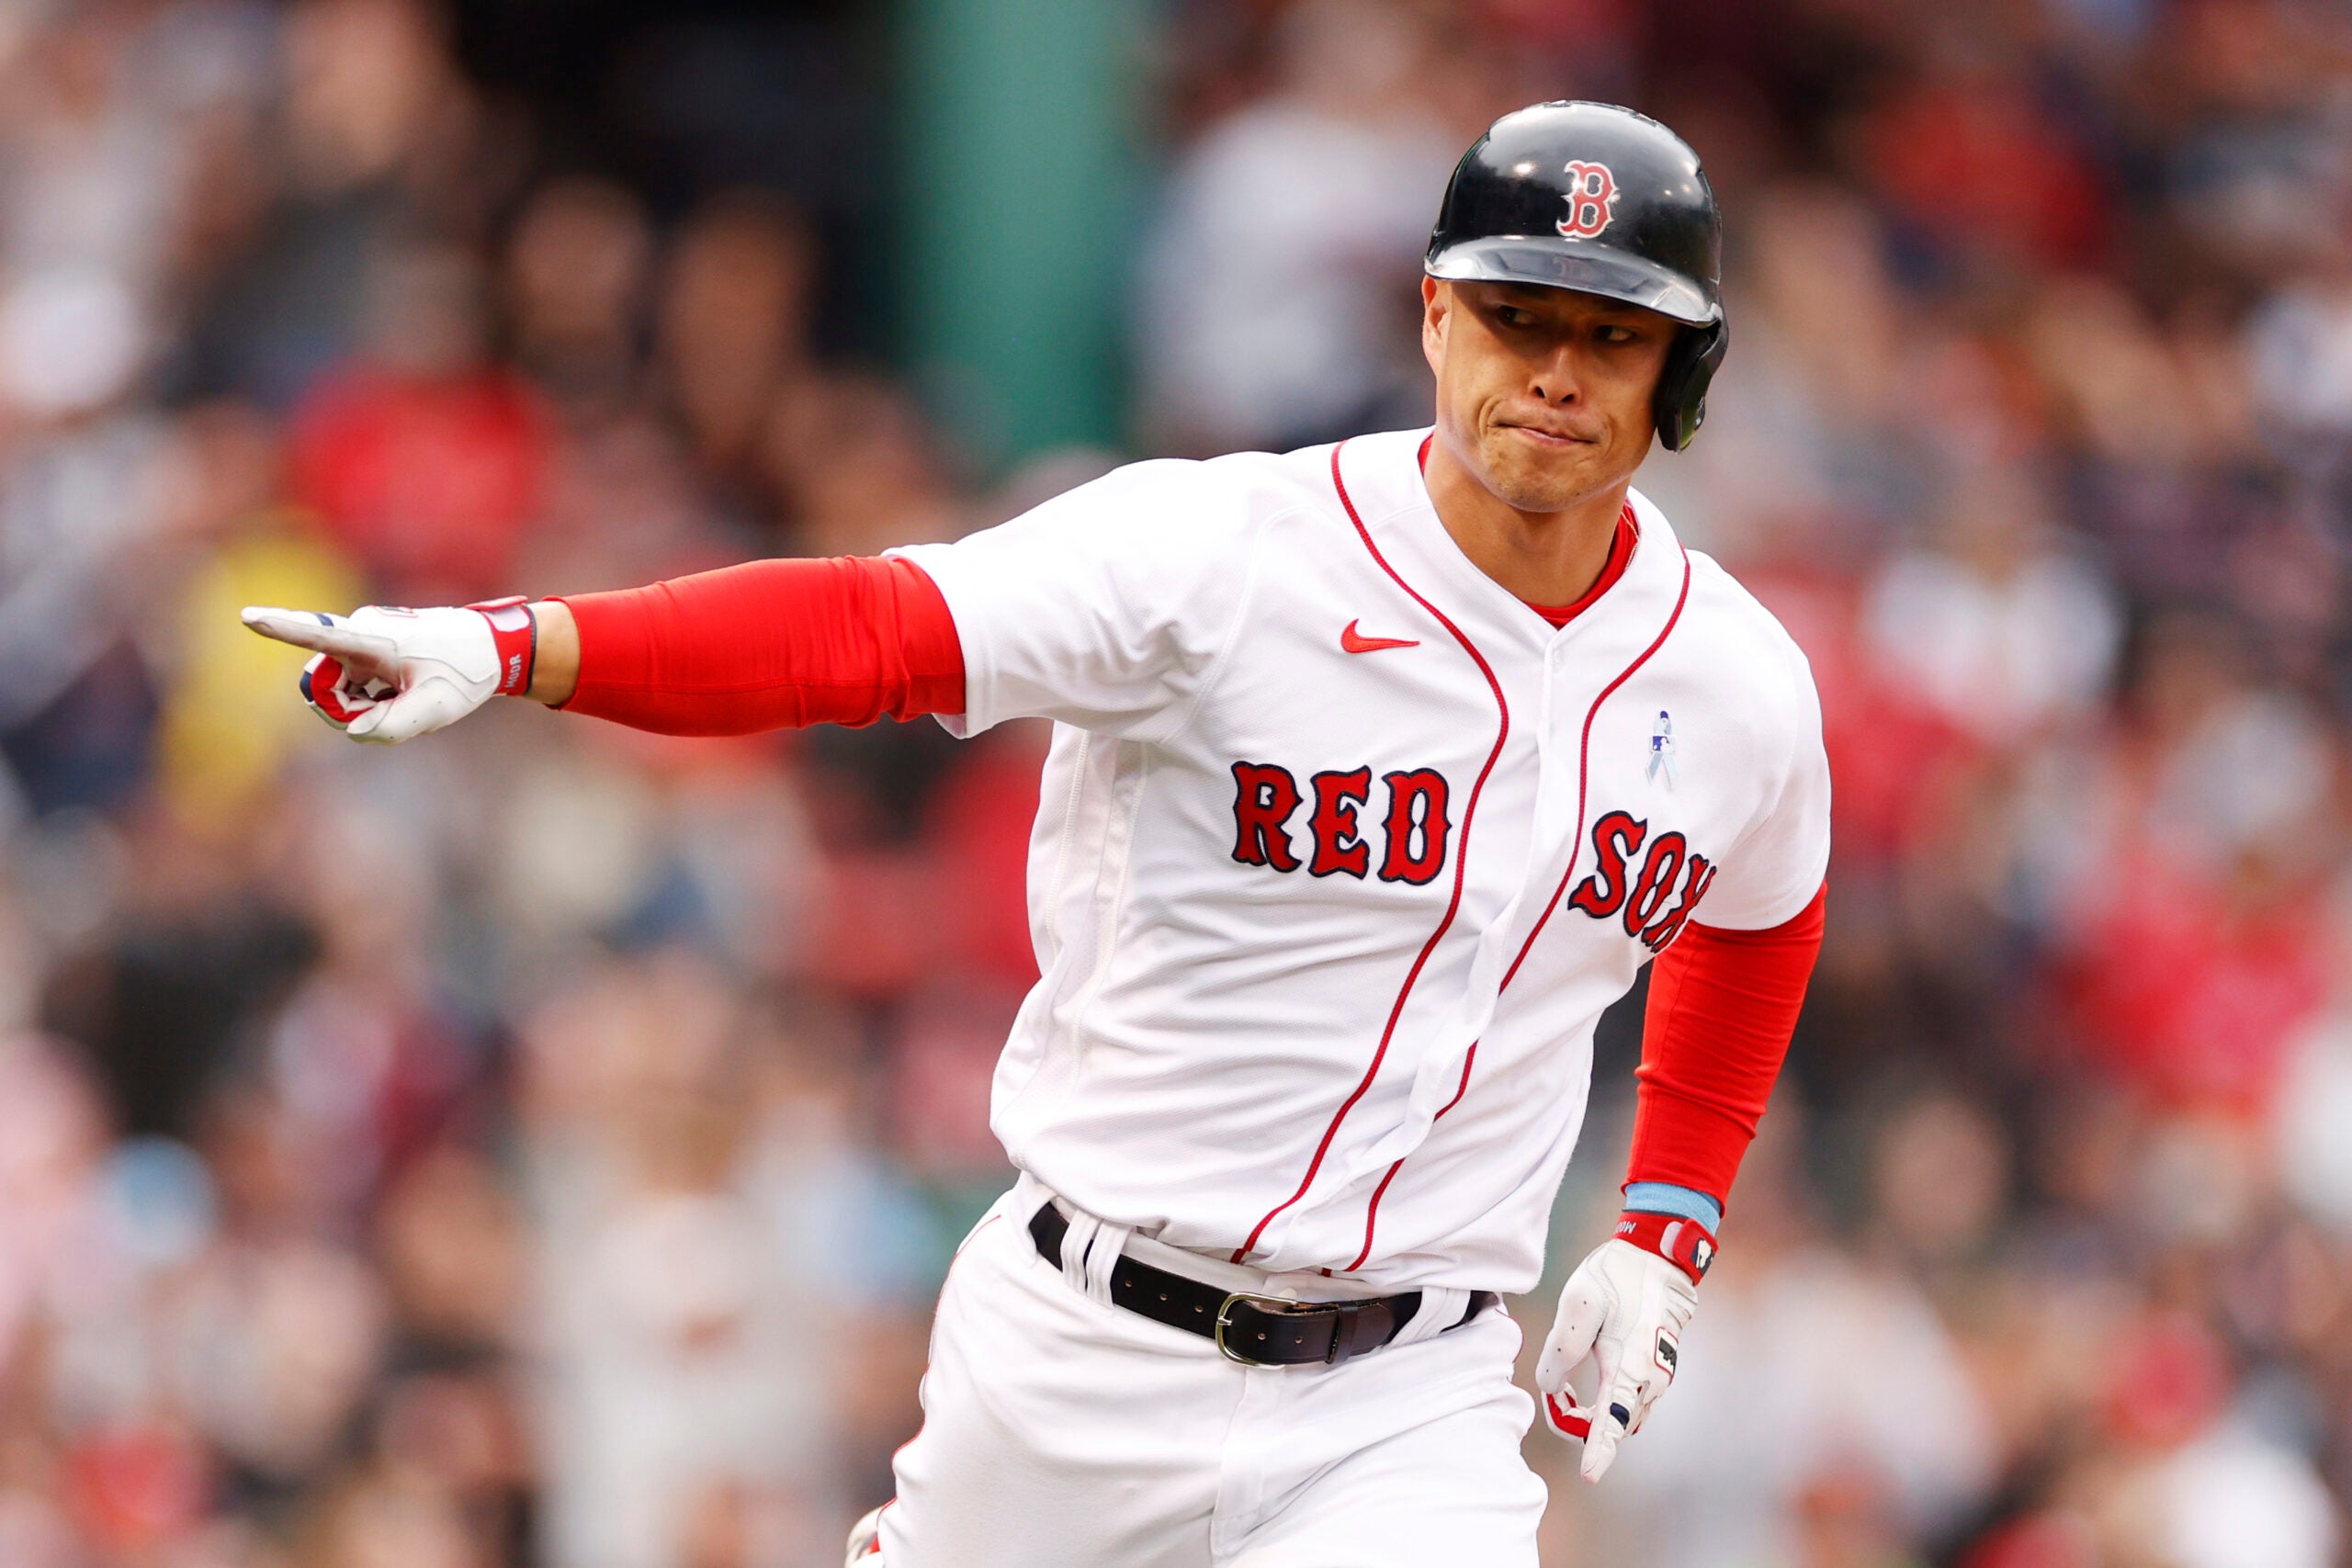 Rob Refsnyder points after an RBI single for the Red Sox